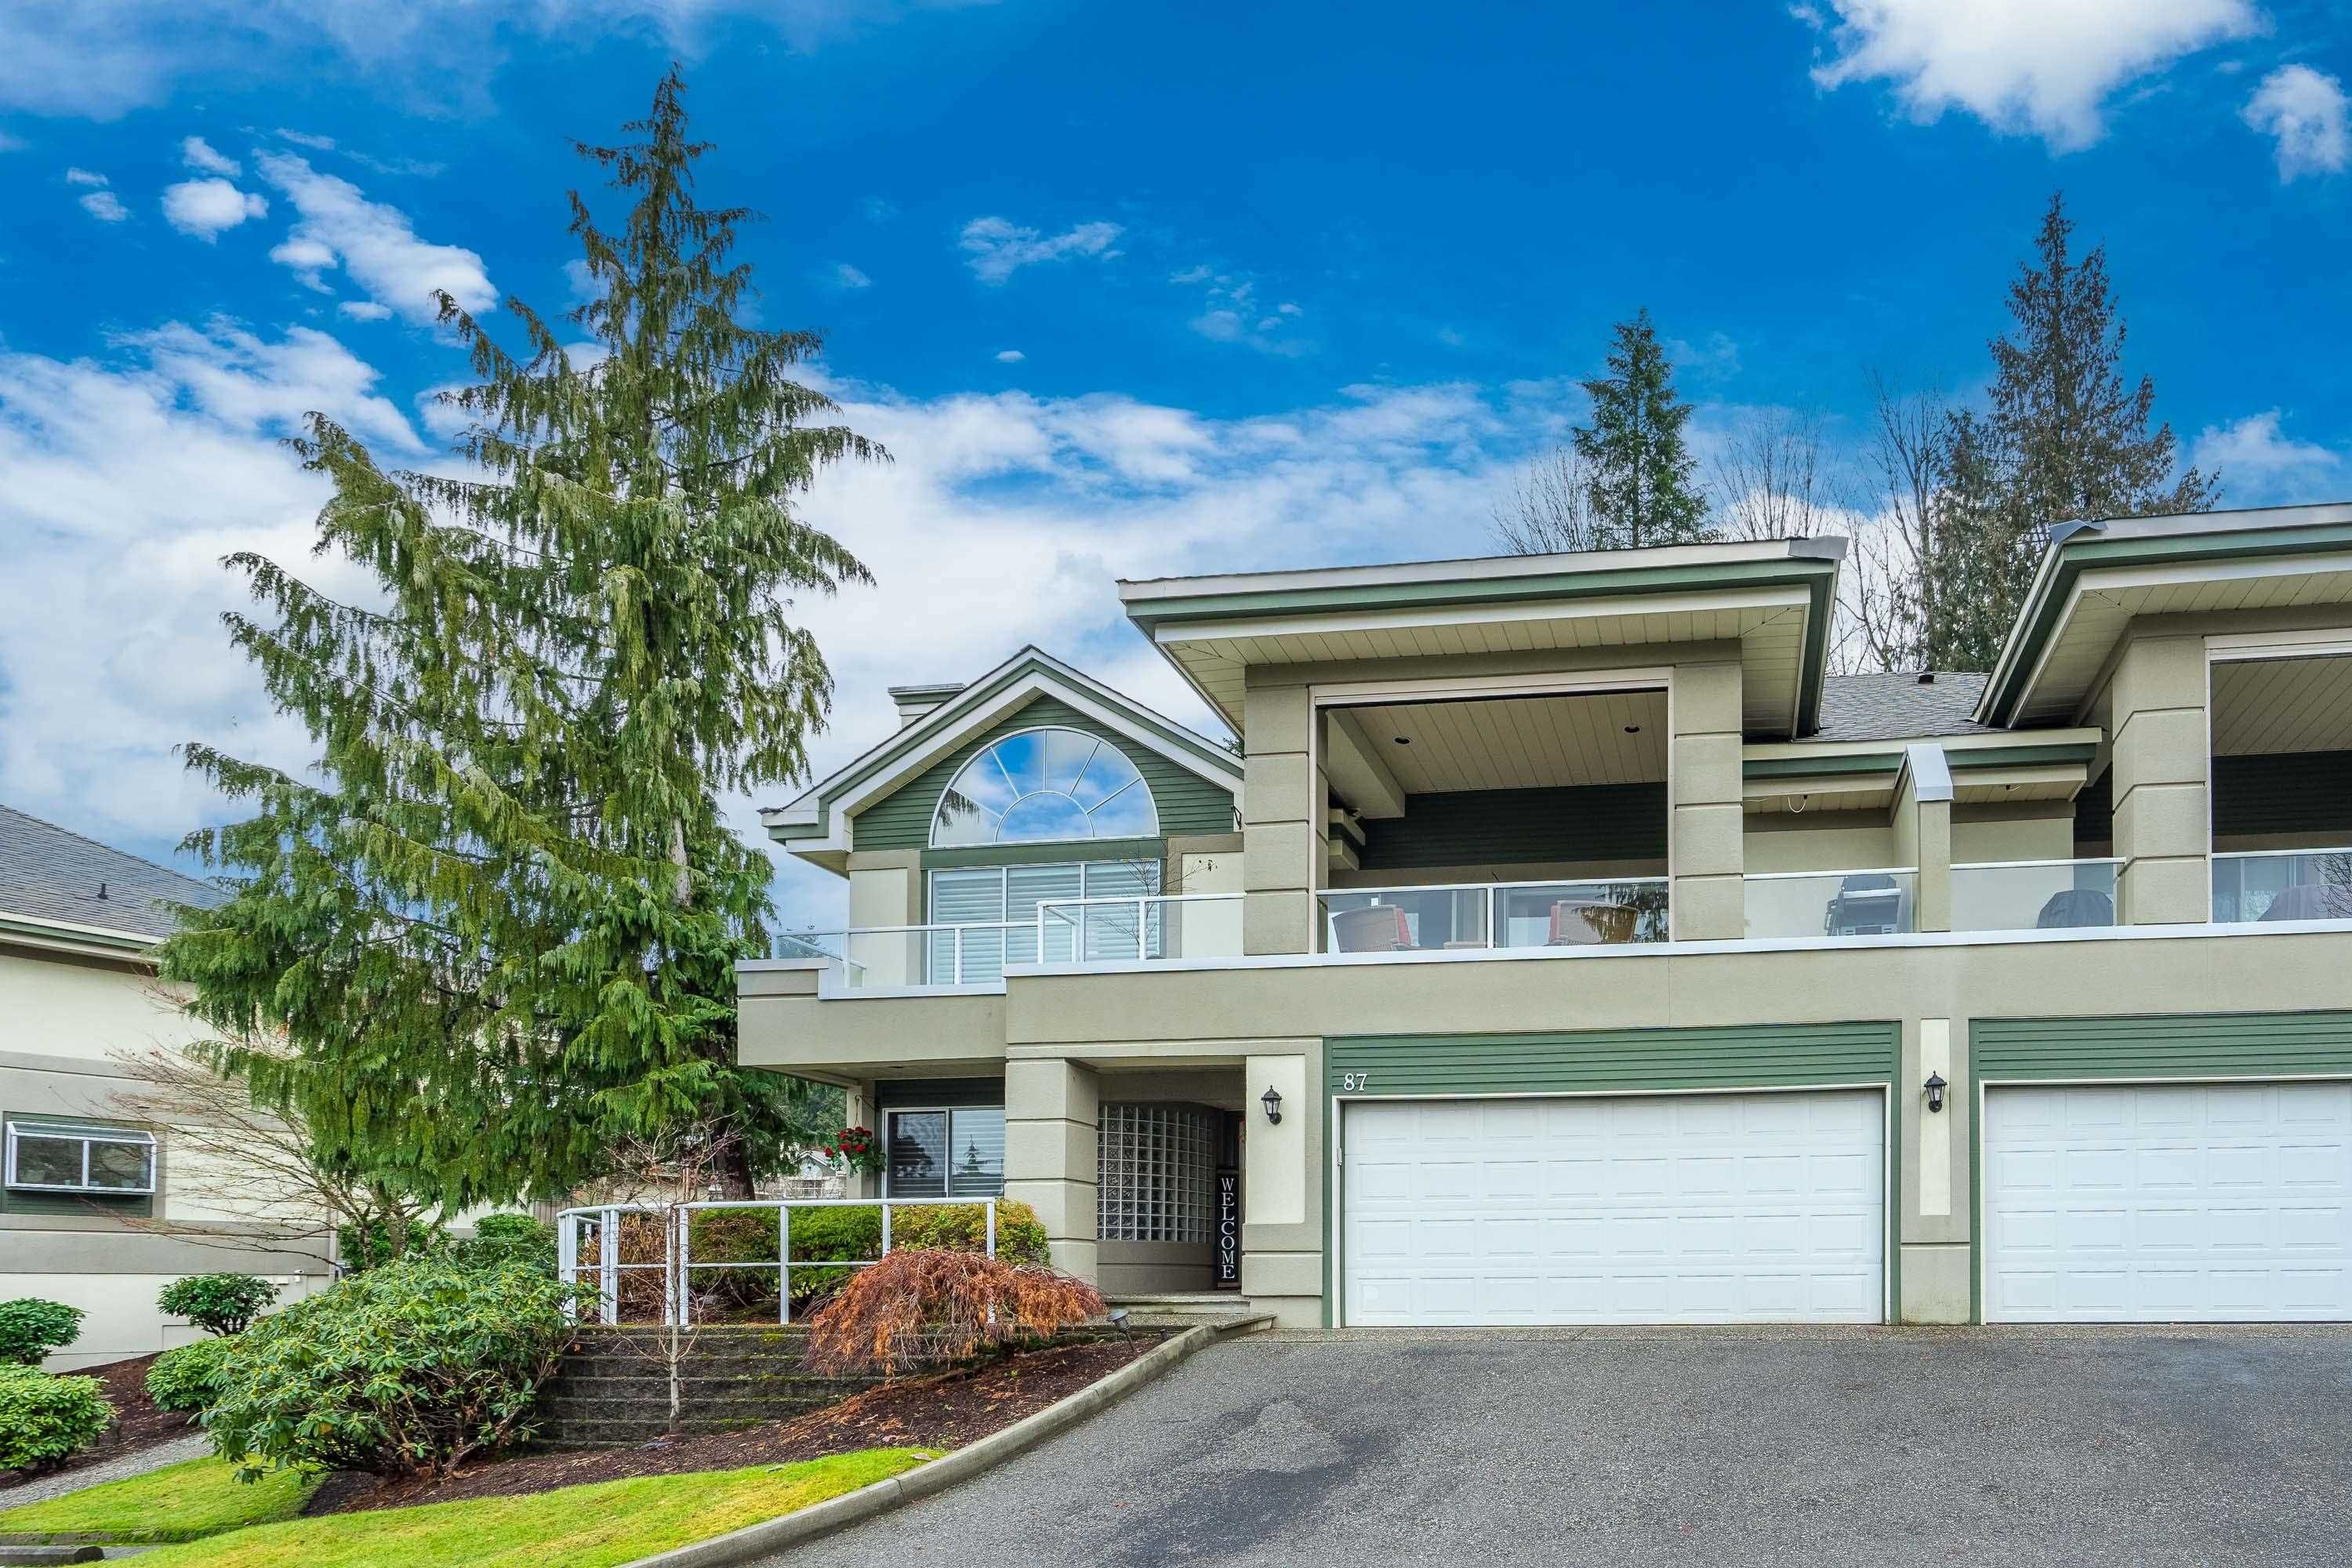 New property listed in Abbotsford East, Abbotsford